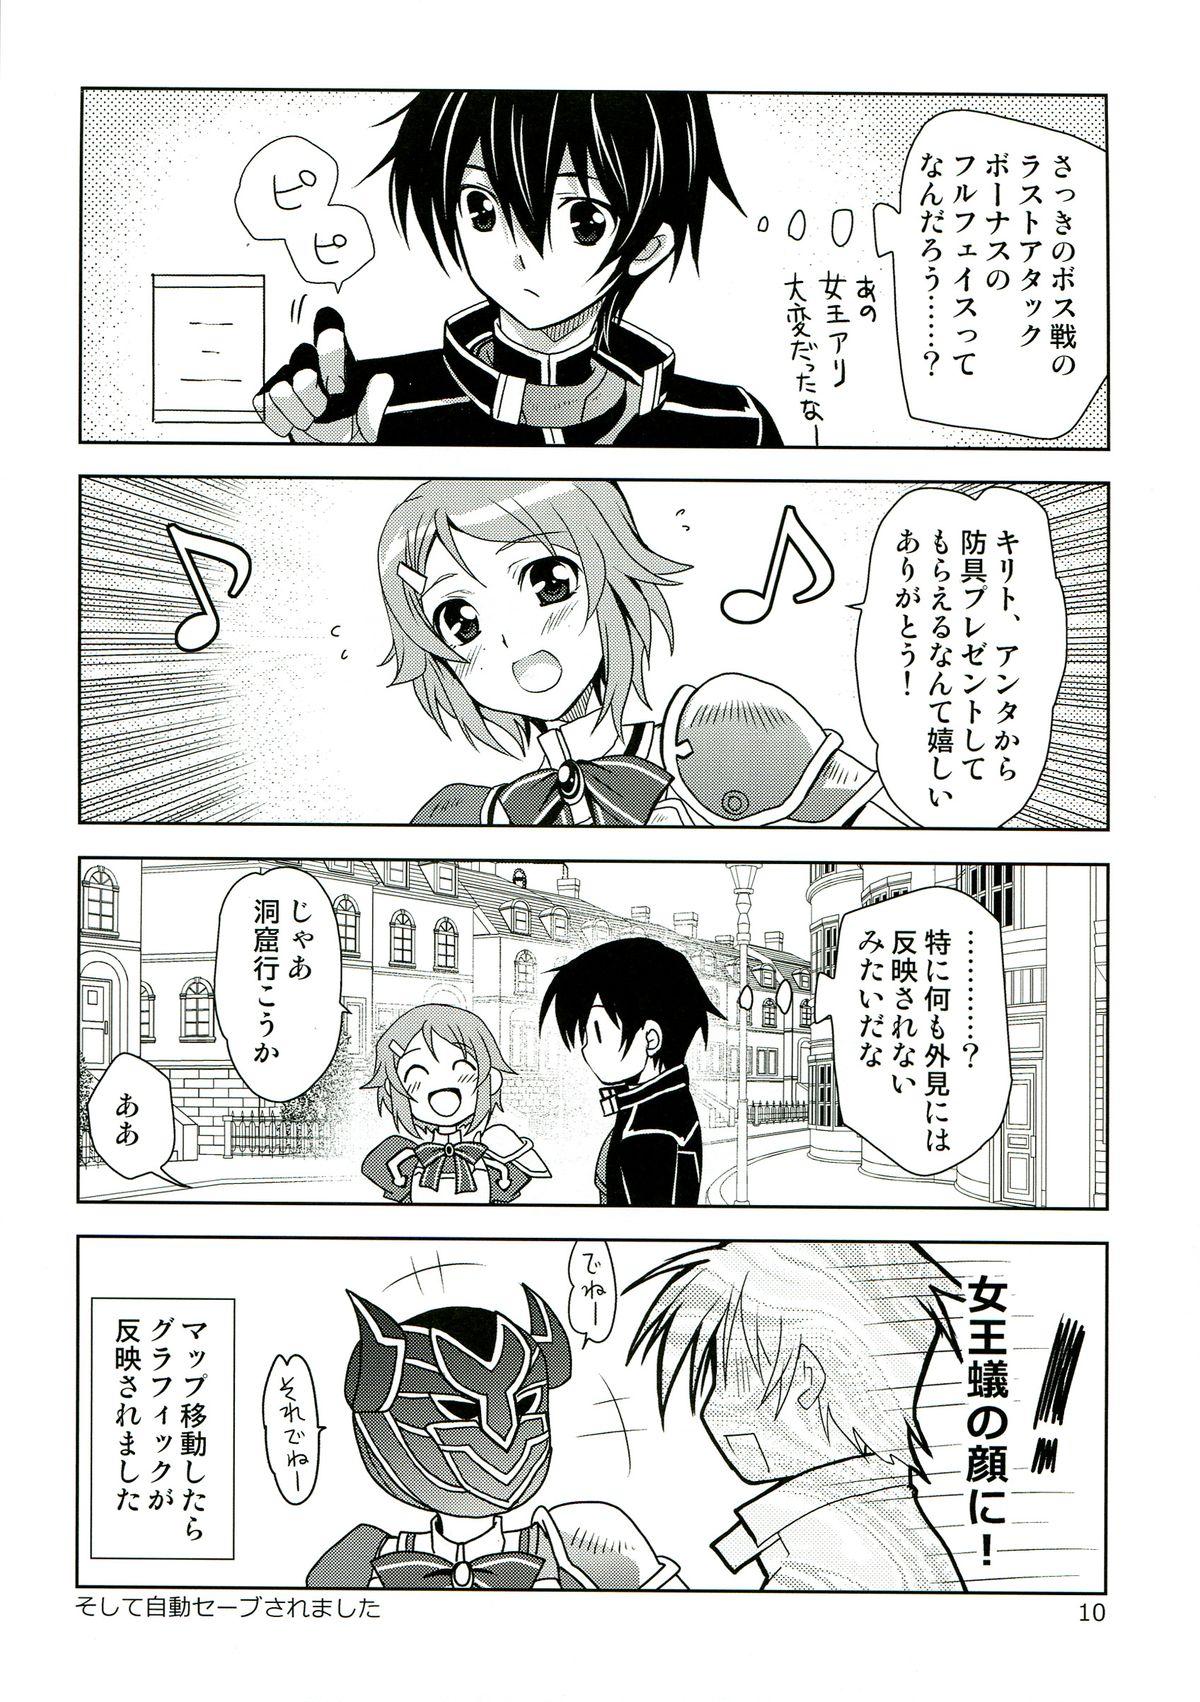 Francaise ONE MORE LOVE - Sword art online Big Dick - Page 10